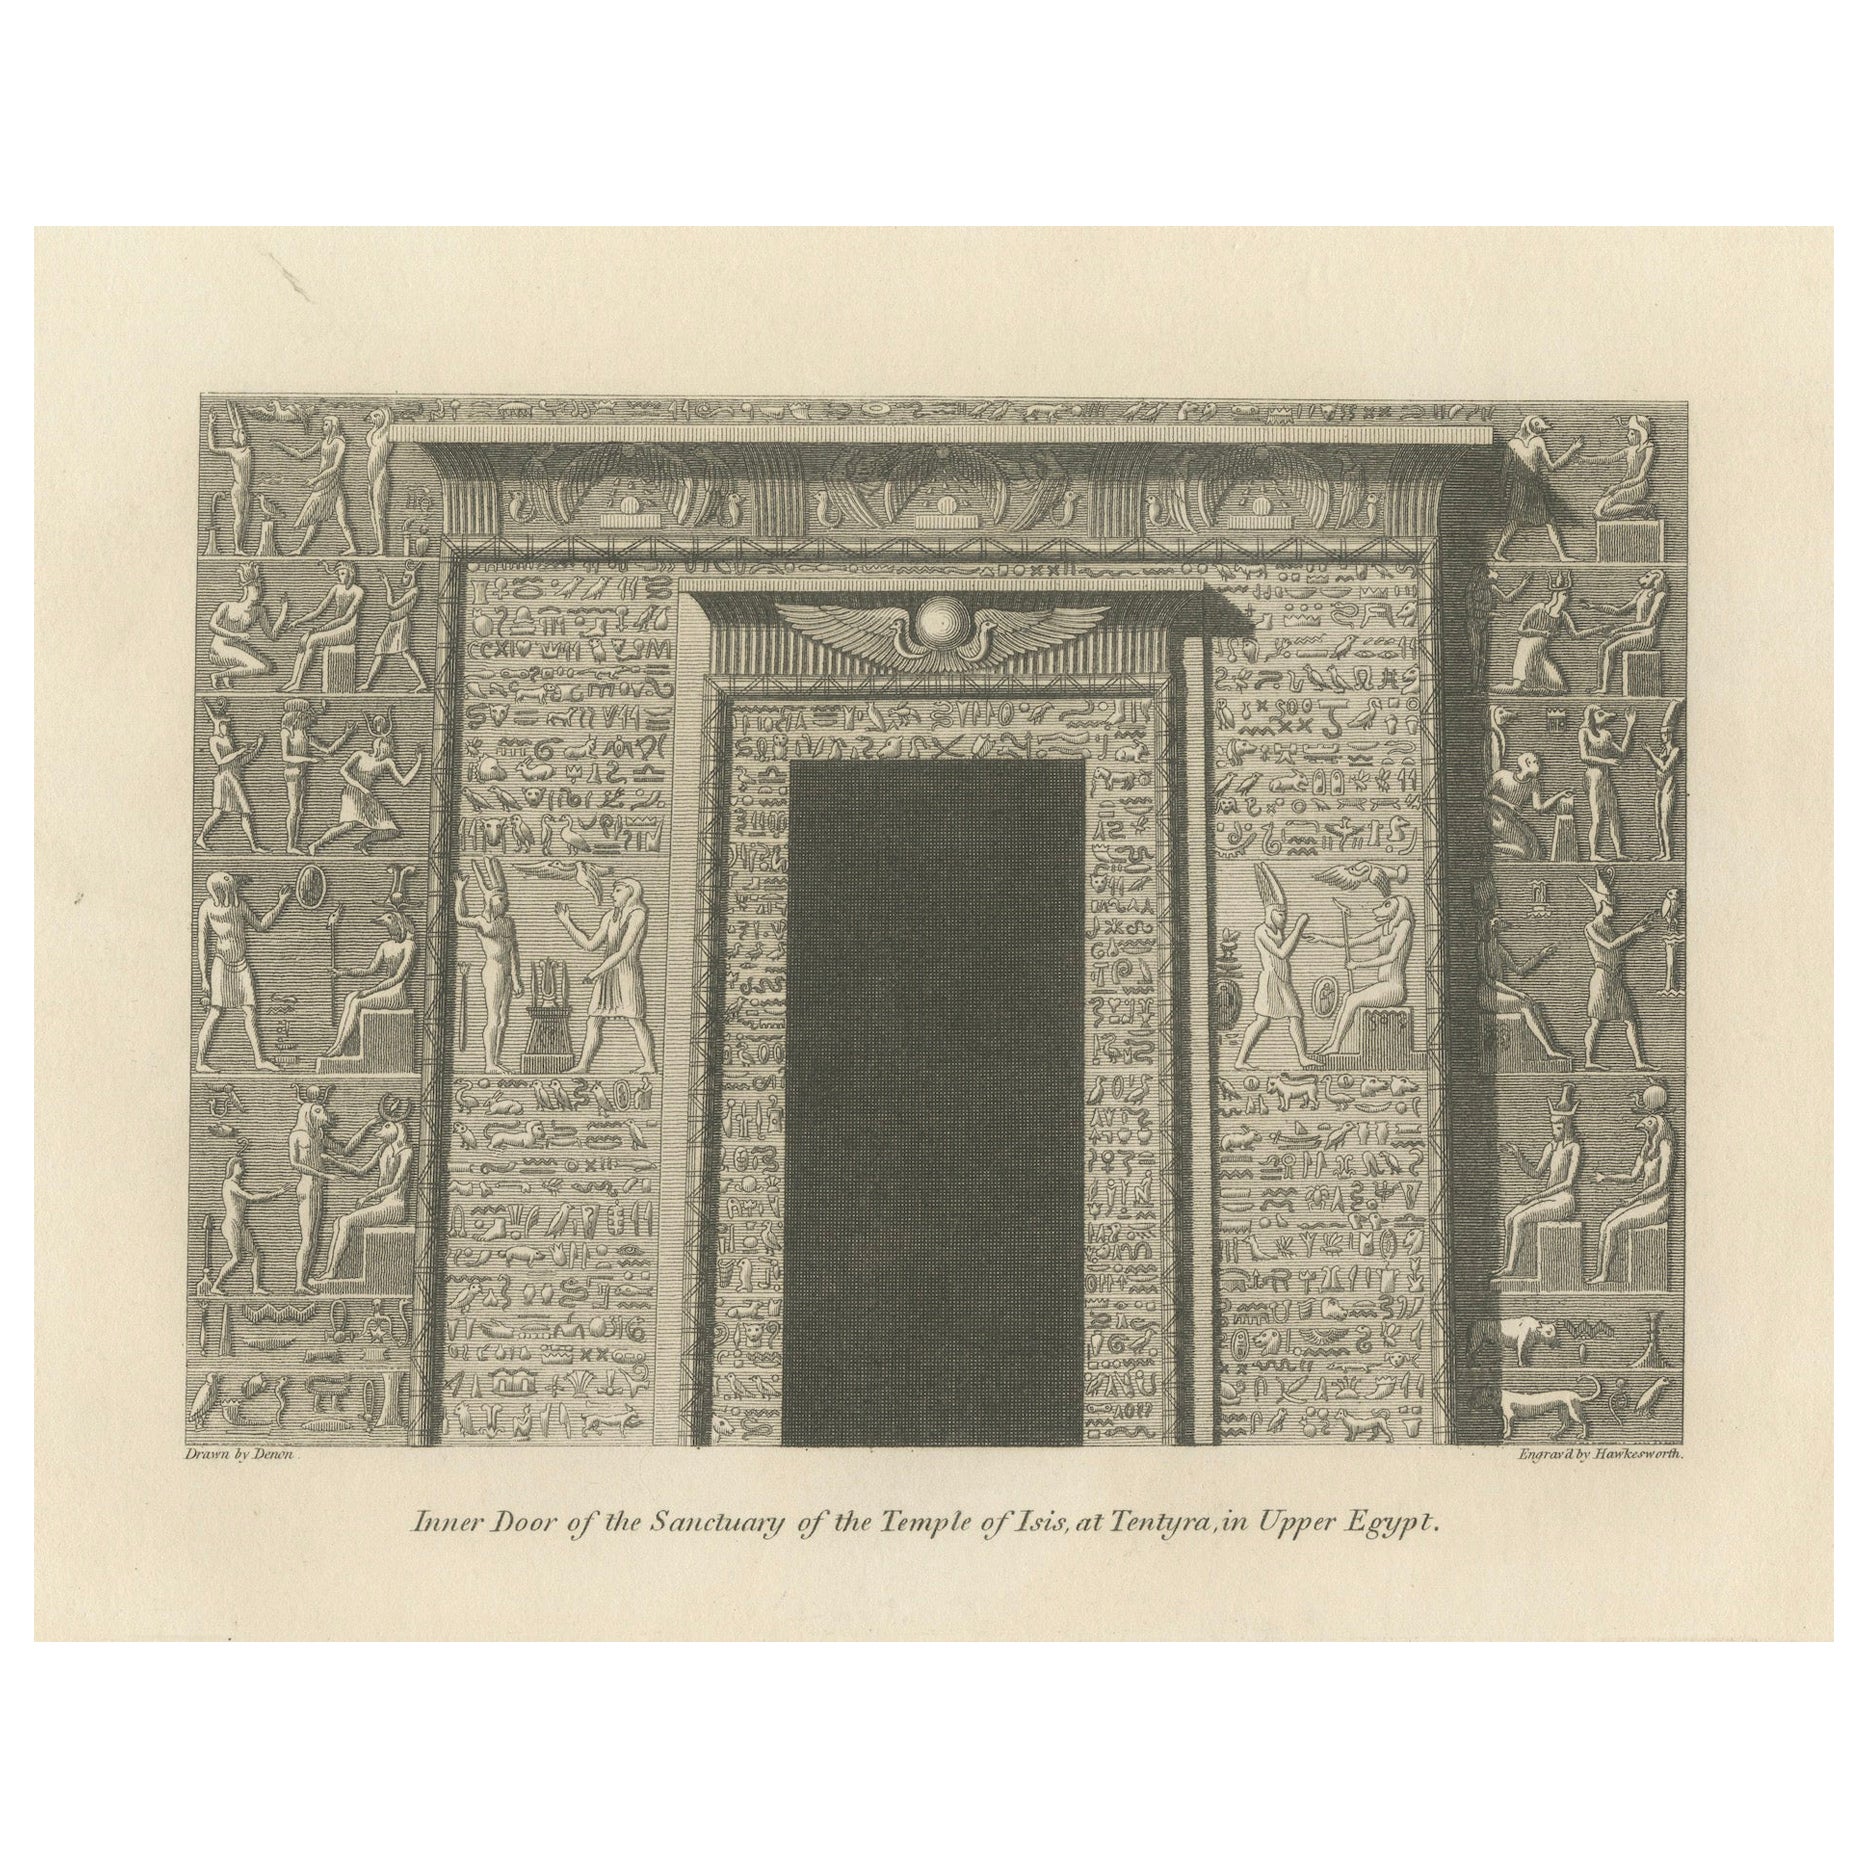 Threshold of Divinity: The Dendera Isis Temple Doorway in Upper Egypt, 1801